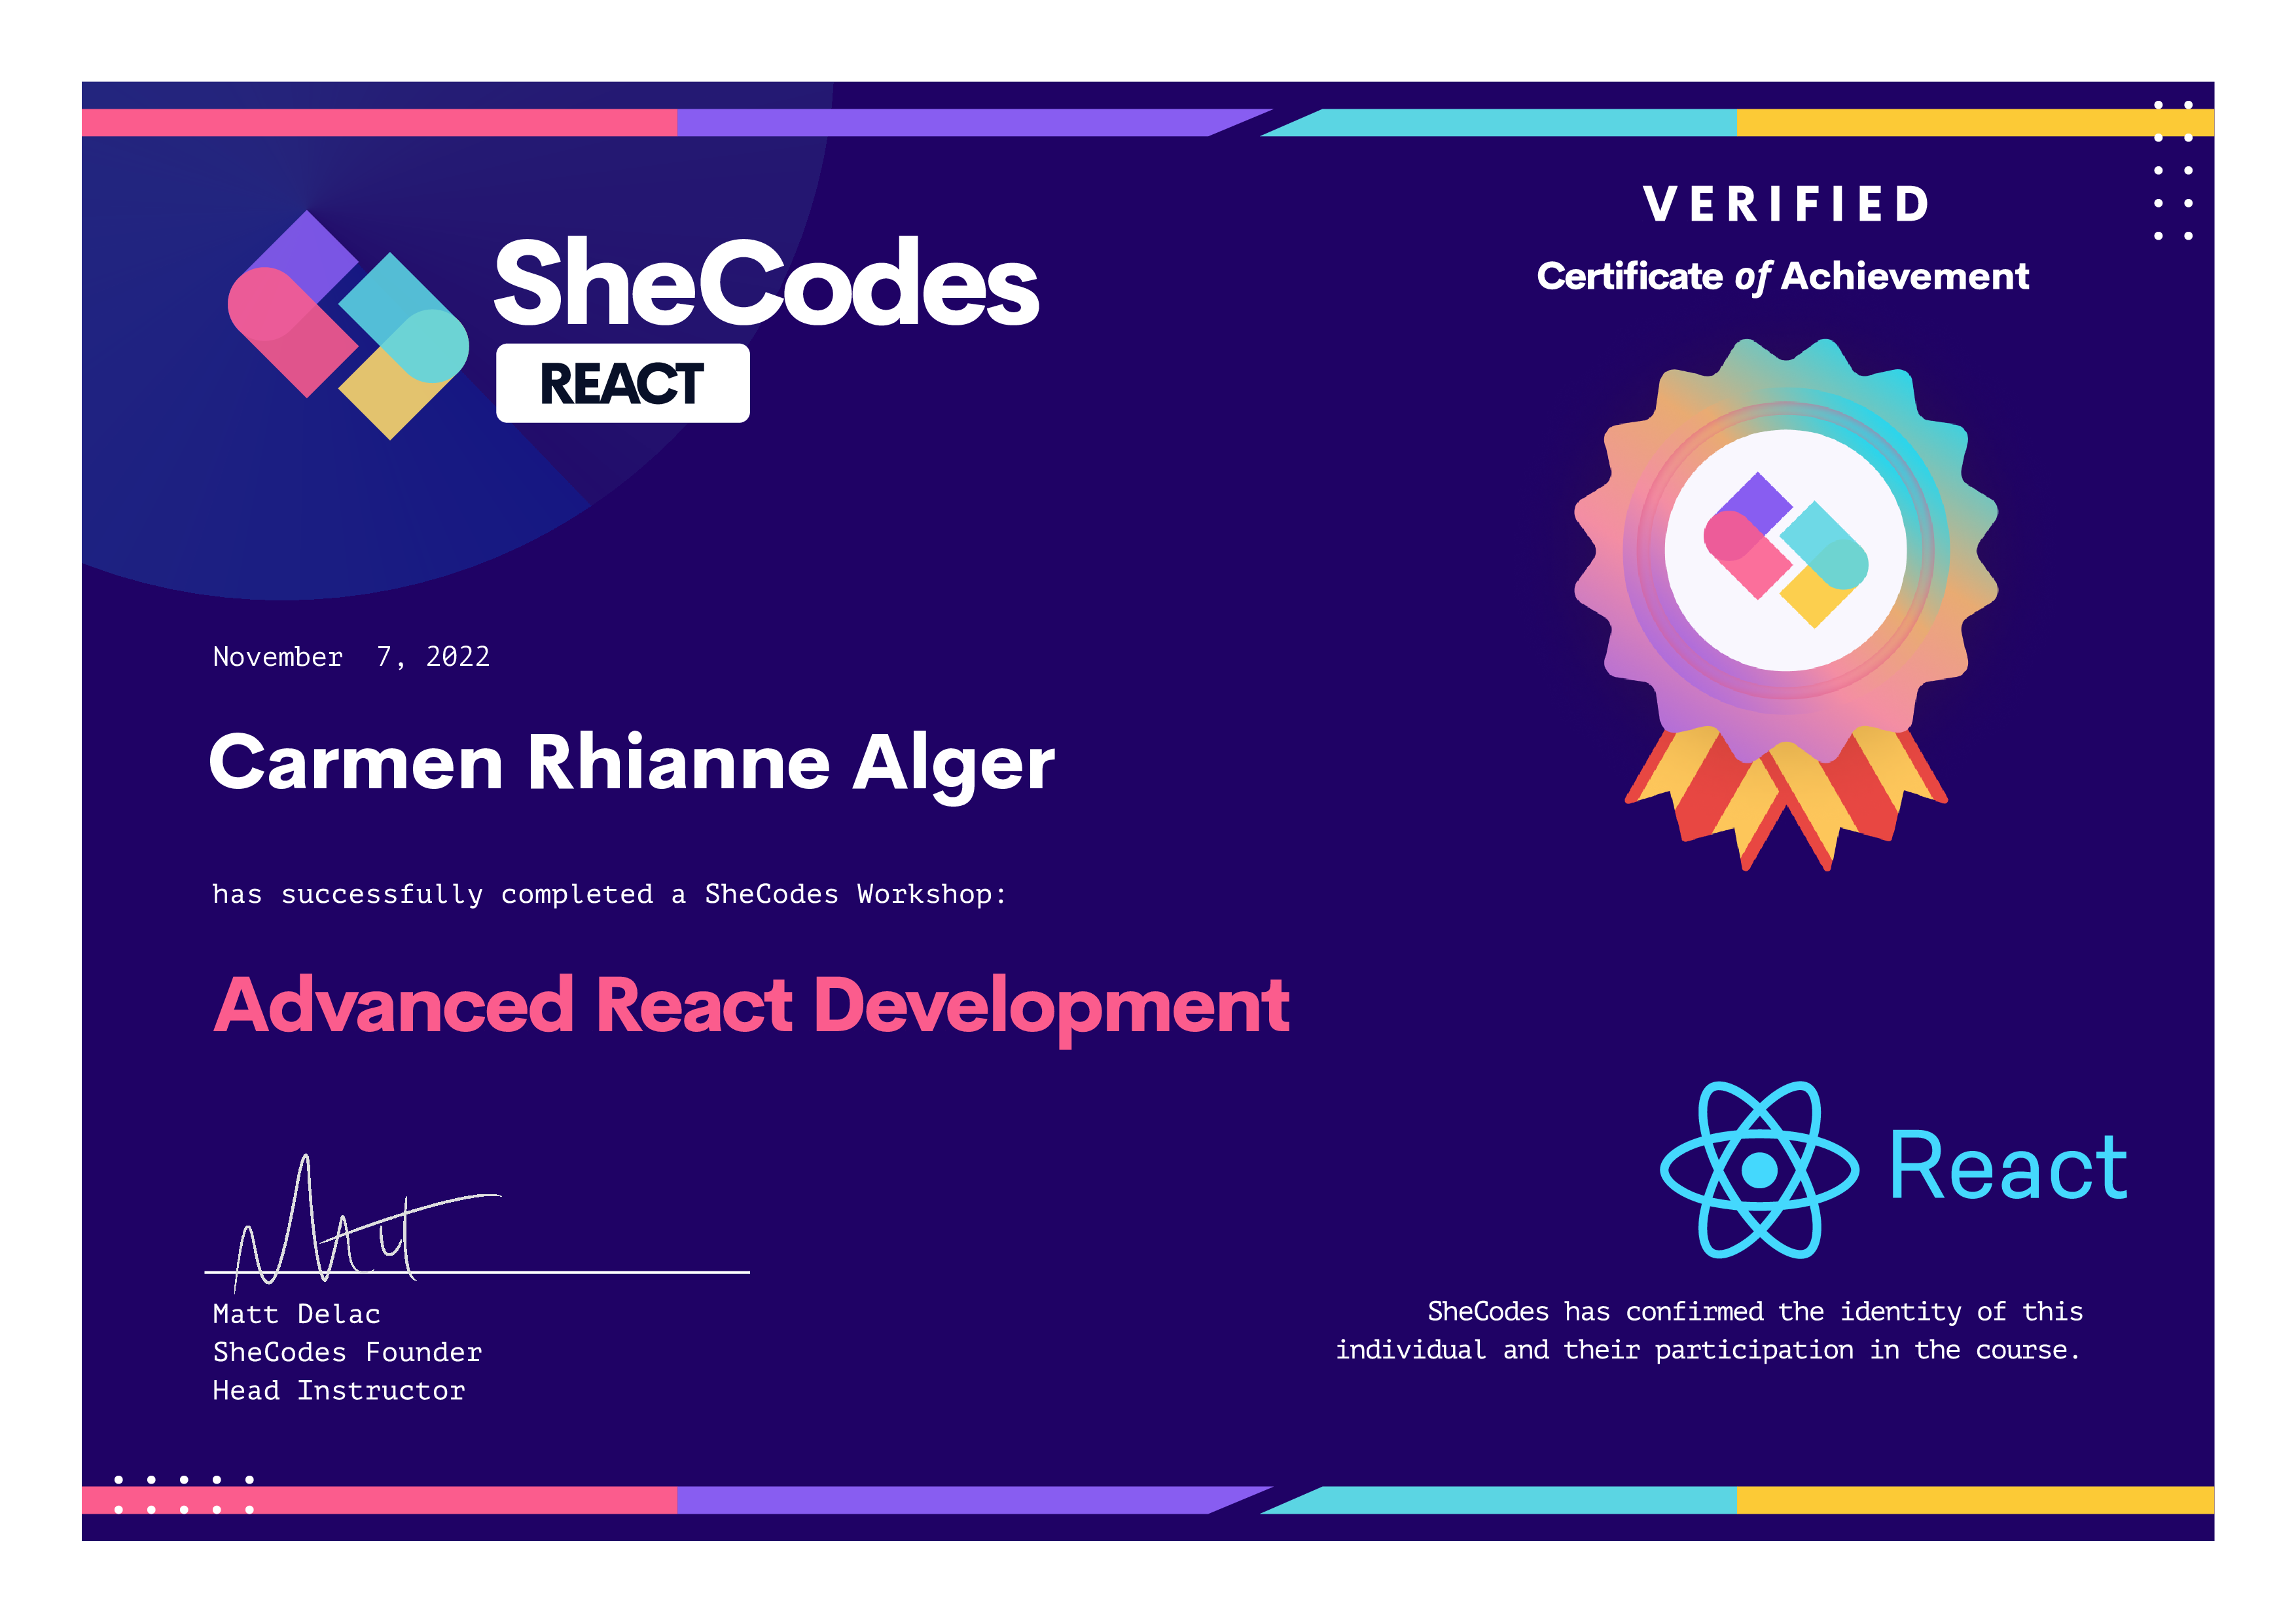 A certificate for the SheCodes React course